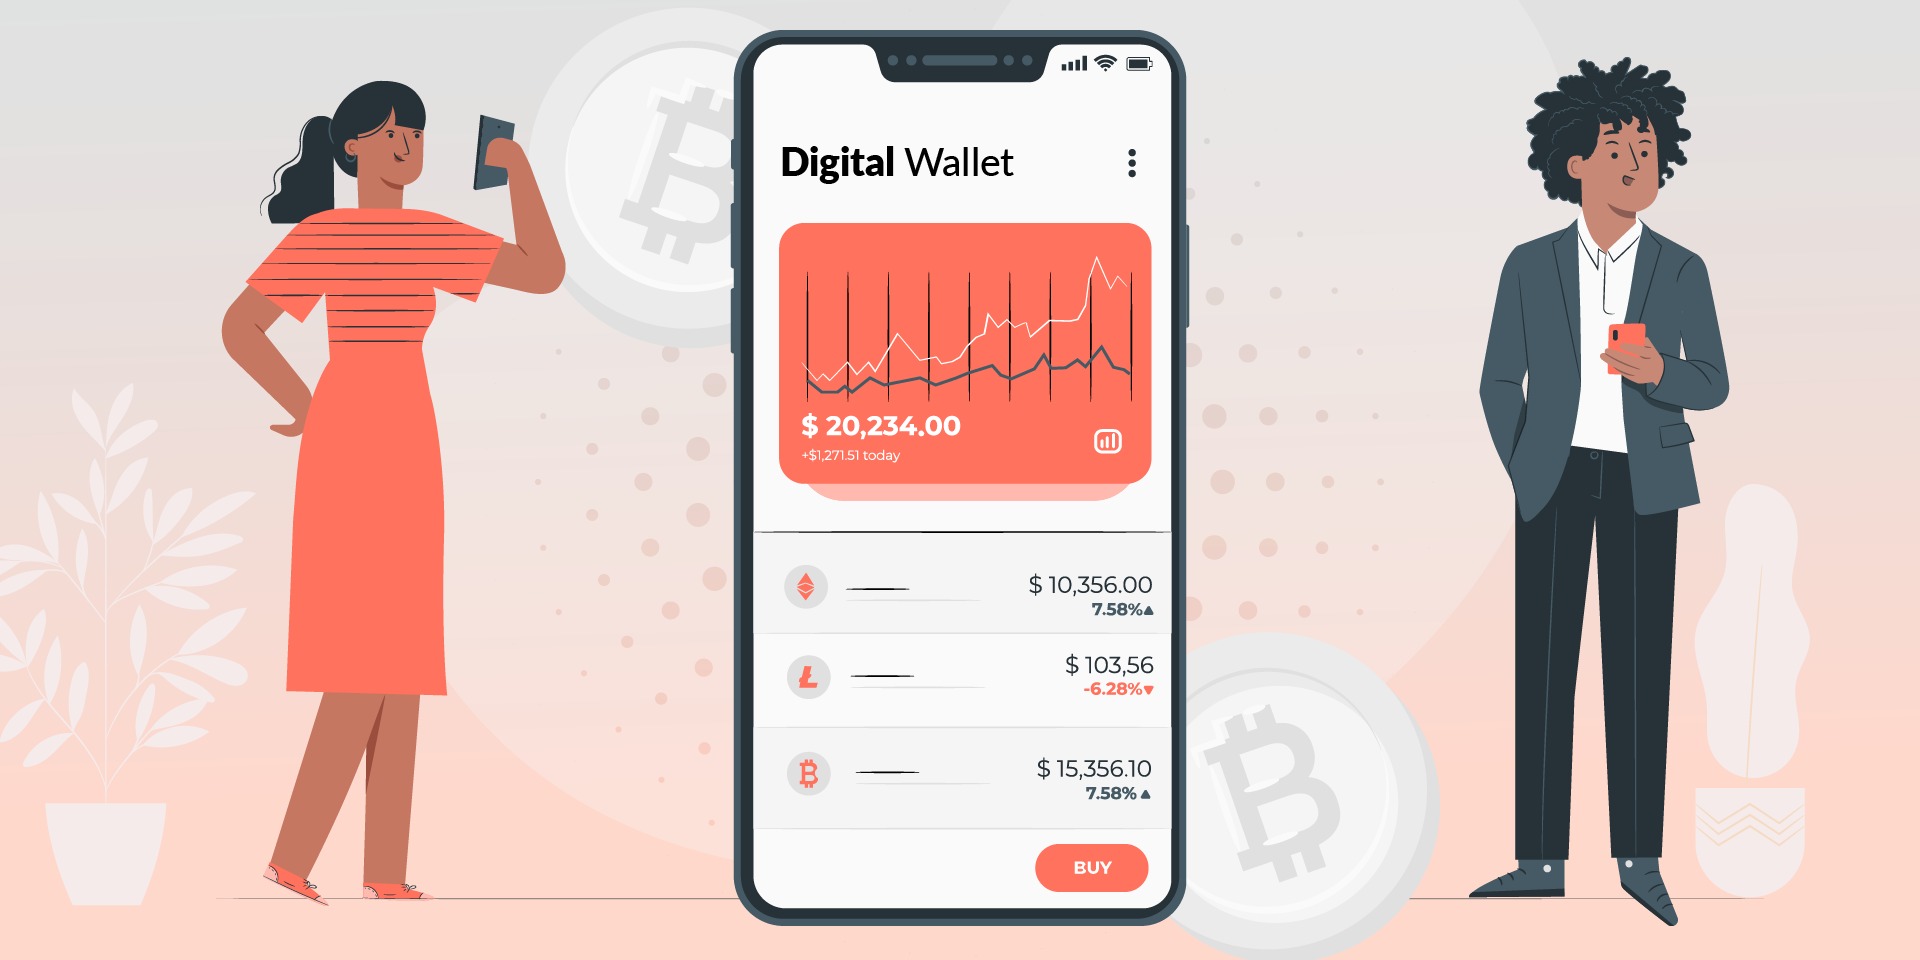 Digital Wallets have gained their place